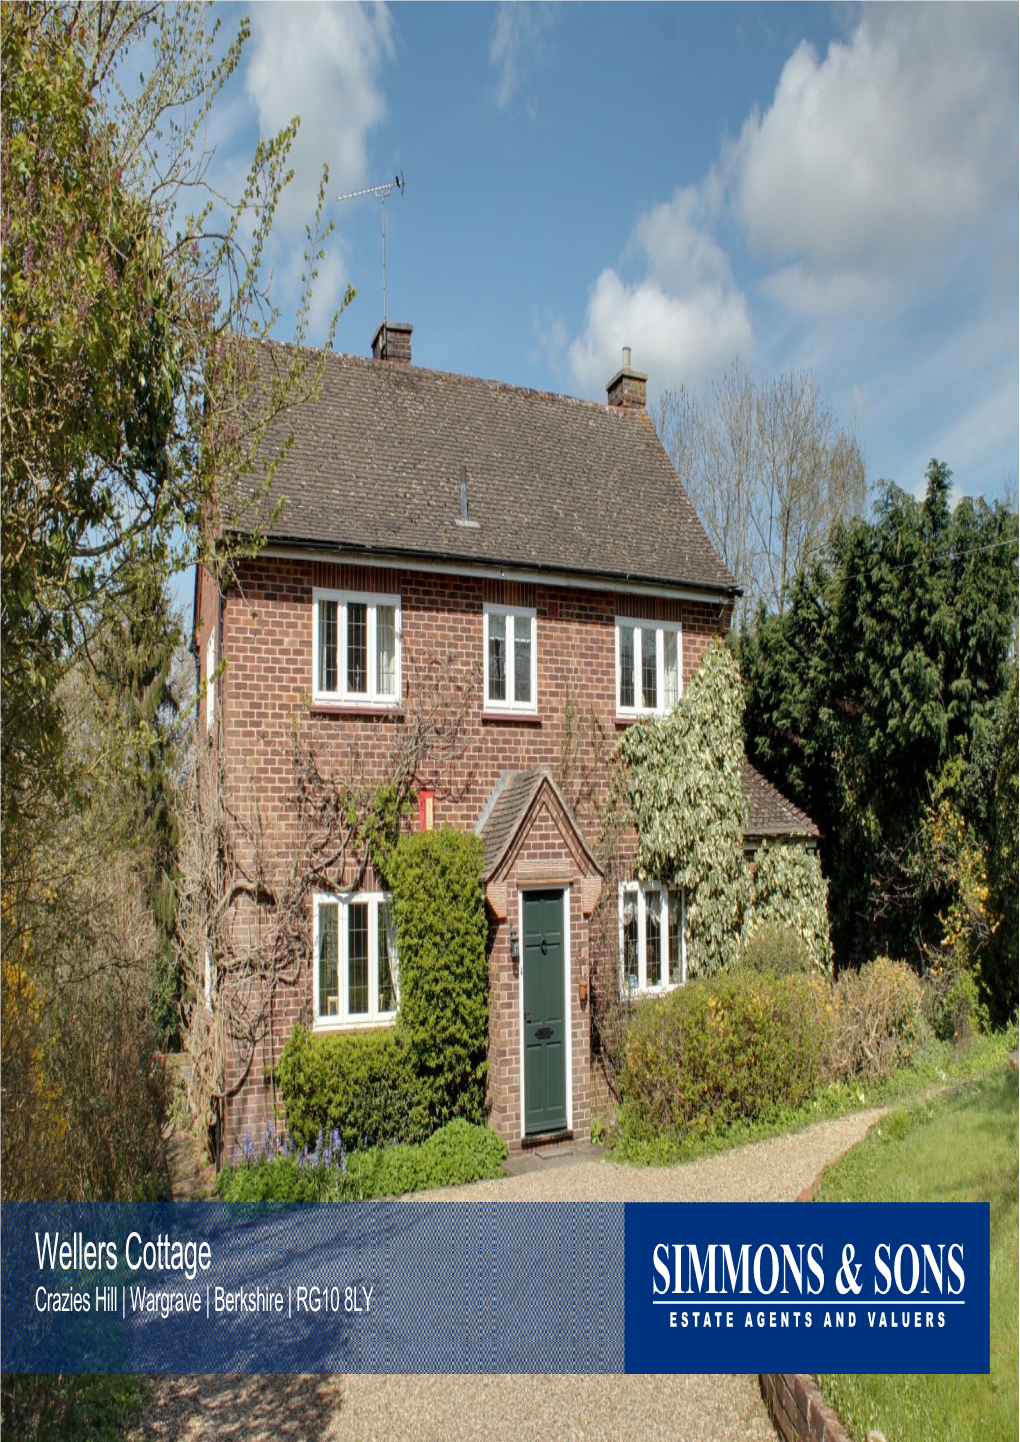 Wellers Cottage Crazies Hill | Wargrave | Berkshire | RG10 8LY